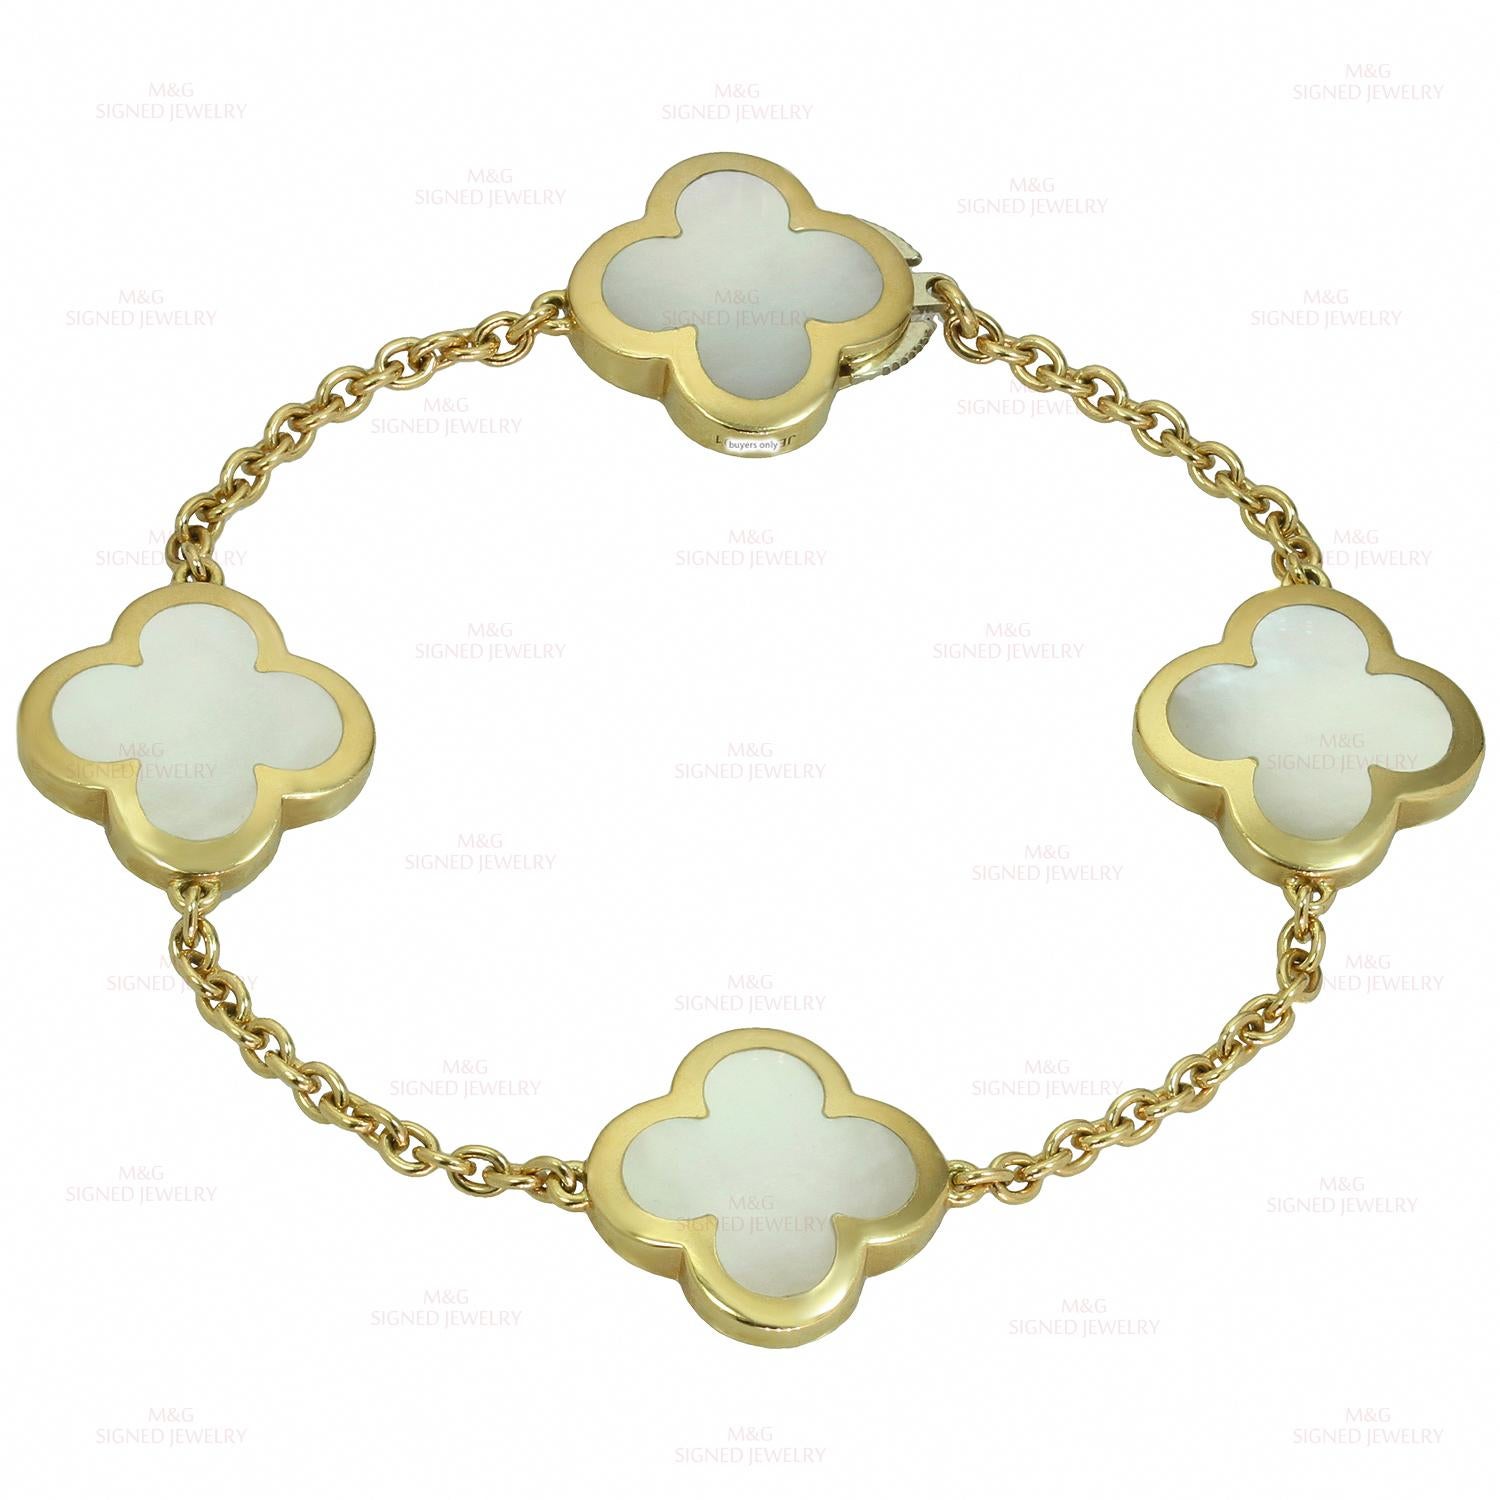 This fabulous Van Cleef & Arpels bracelet from the Pure Alhambra collection is crafted in 18k yellow gold and features 4 lucky clover motifs beautifully inlaid with mother-of-pearl. Completed with invisible clasp. Made in France circa 2017.